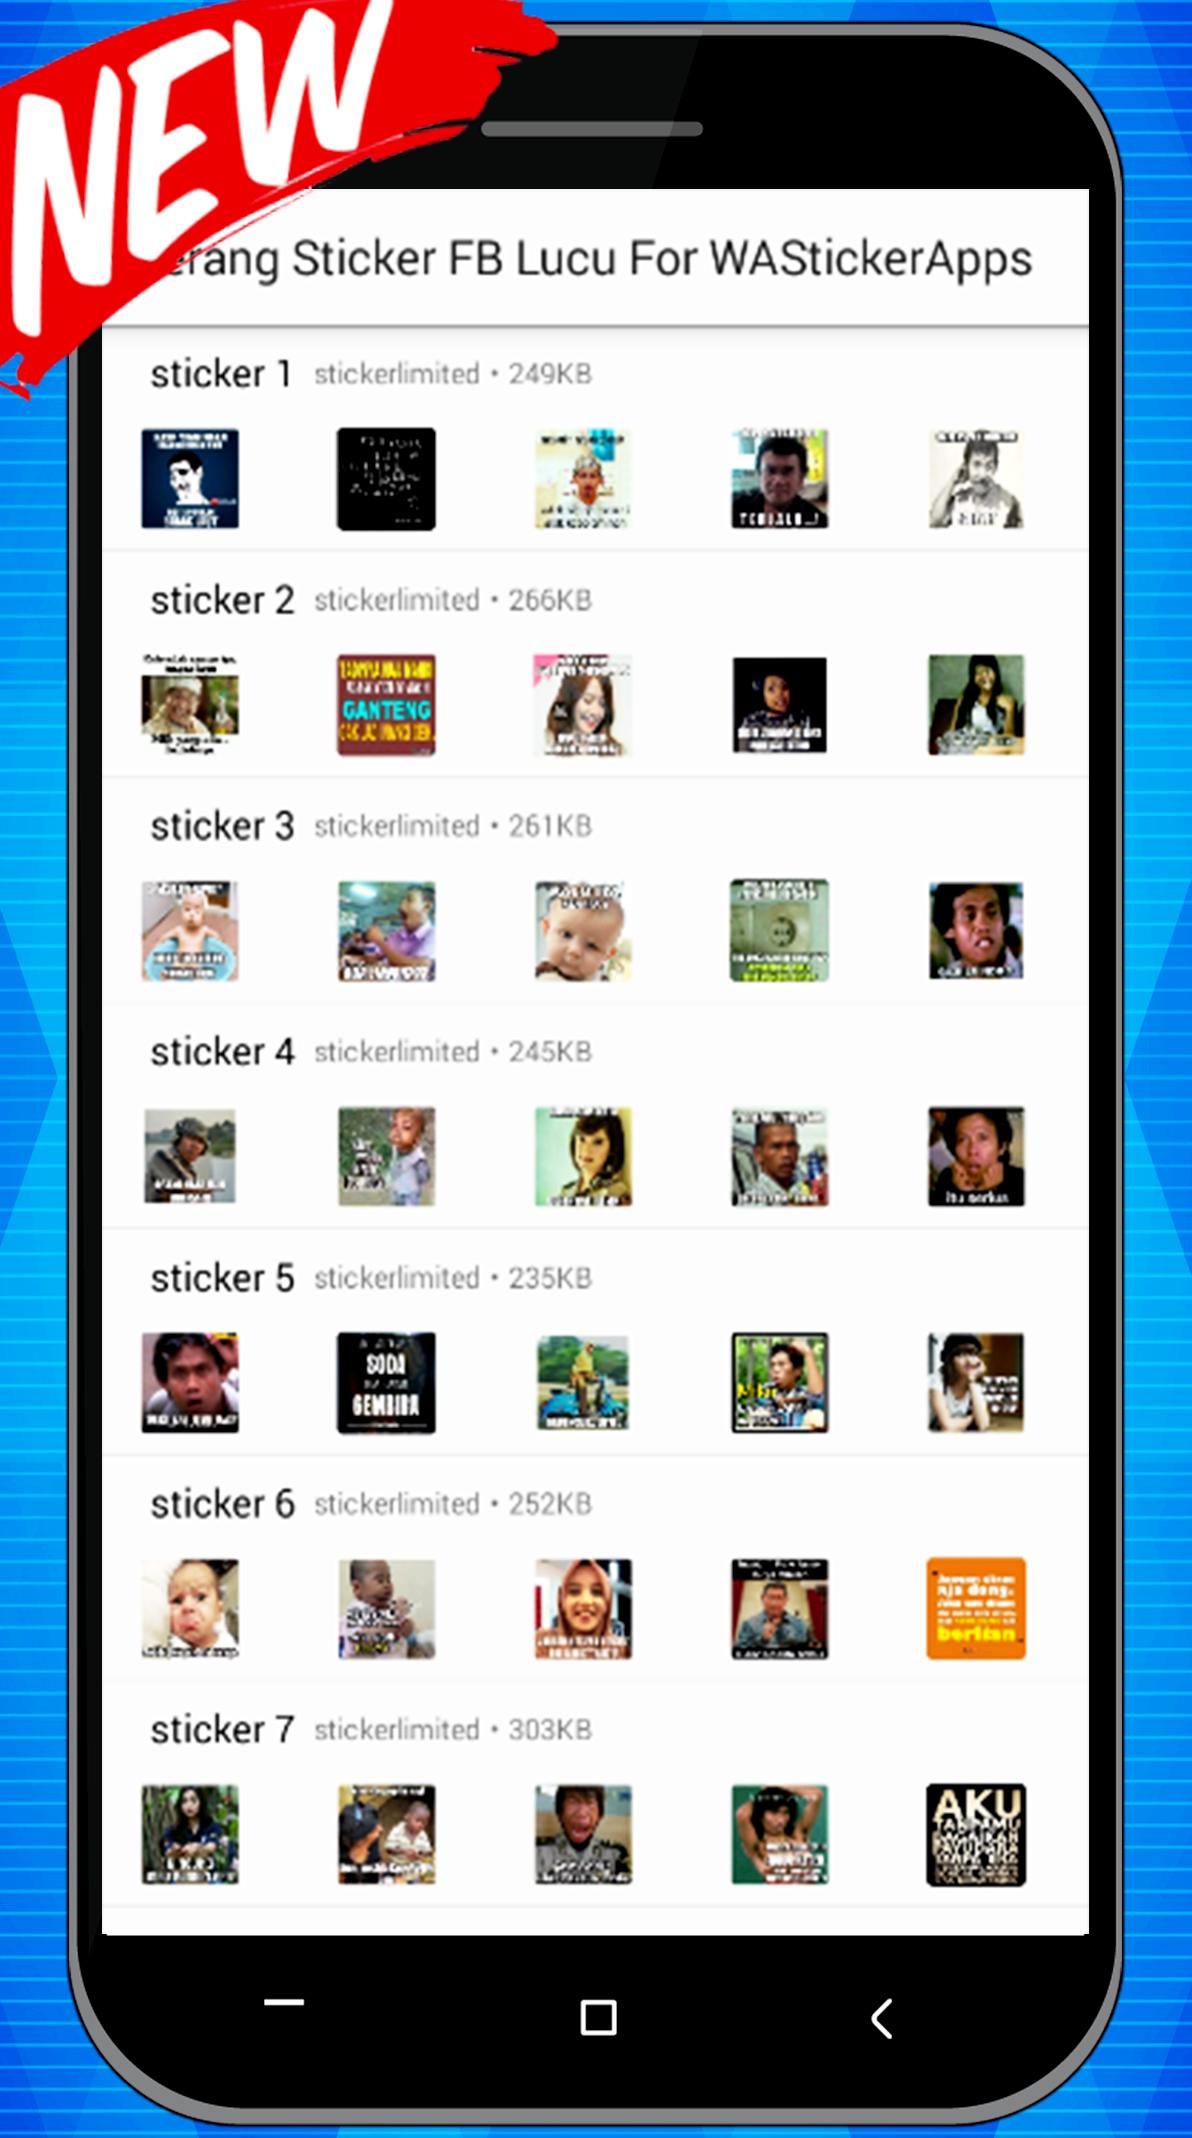 Perang Sticker Fb Lucu For Wastickerapps For Android Apk Download